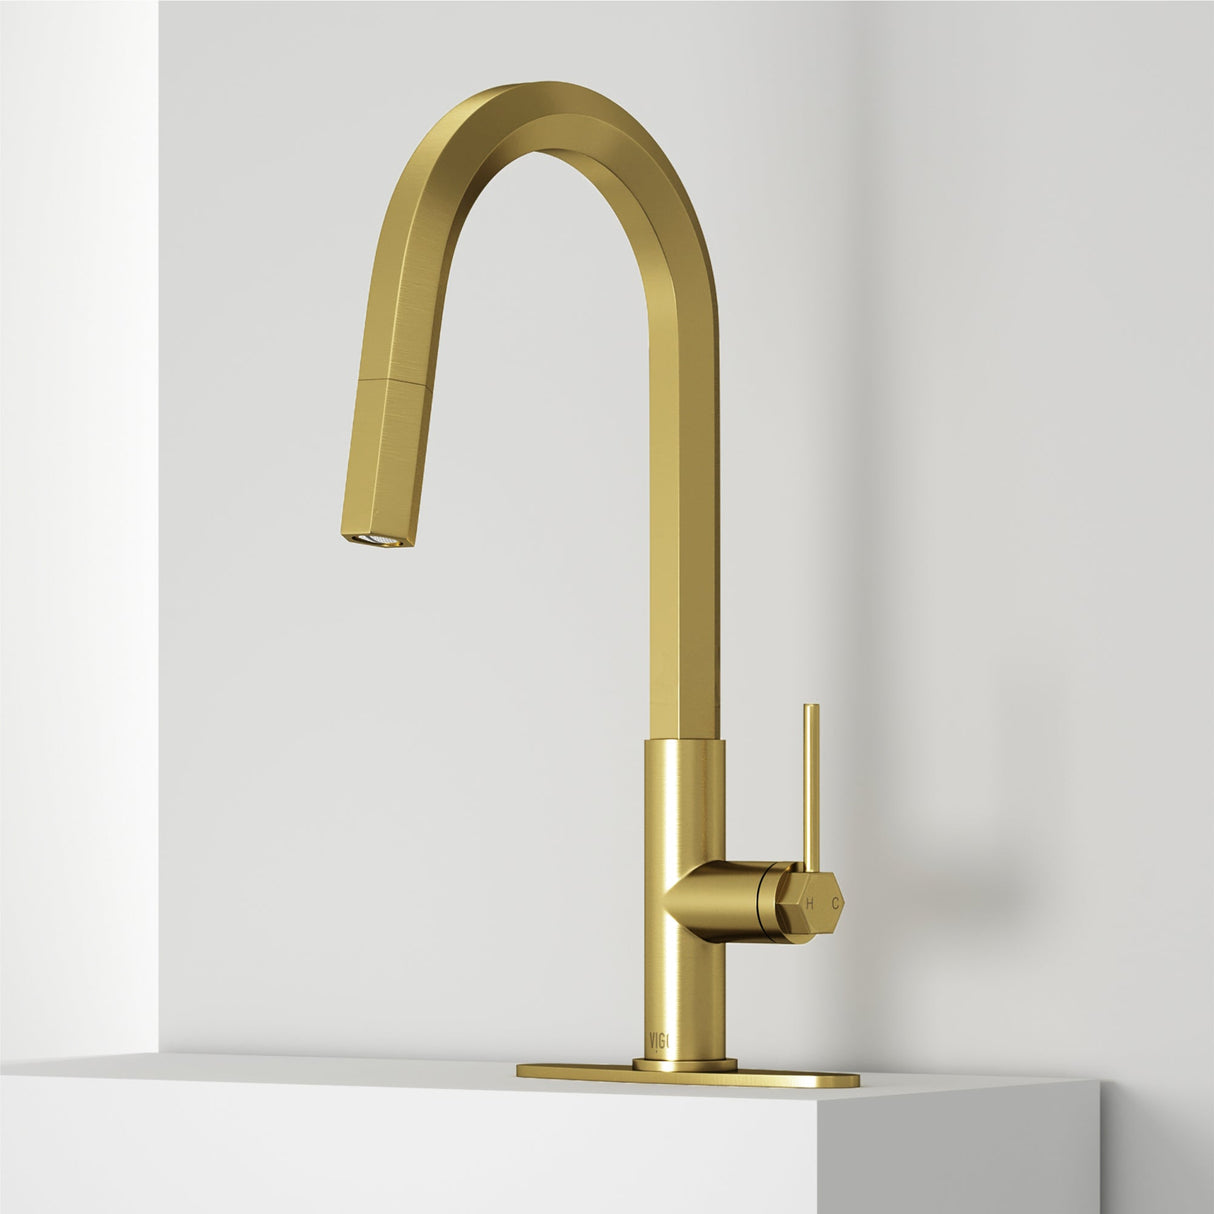 VIGO Hart Hexad Kitchen Faucet with Deck Plate in Matte Brushed Gold VG02034MGK1